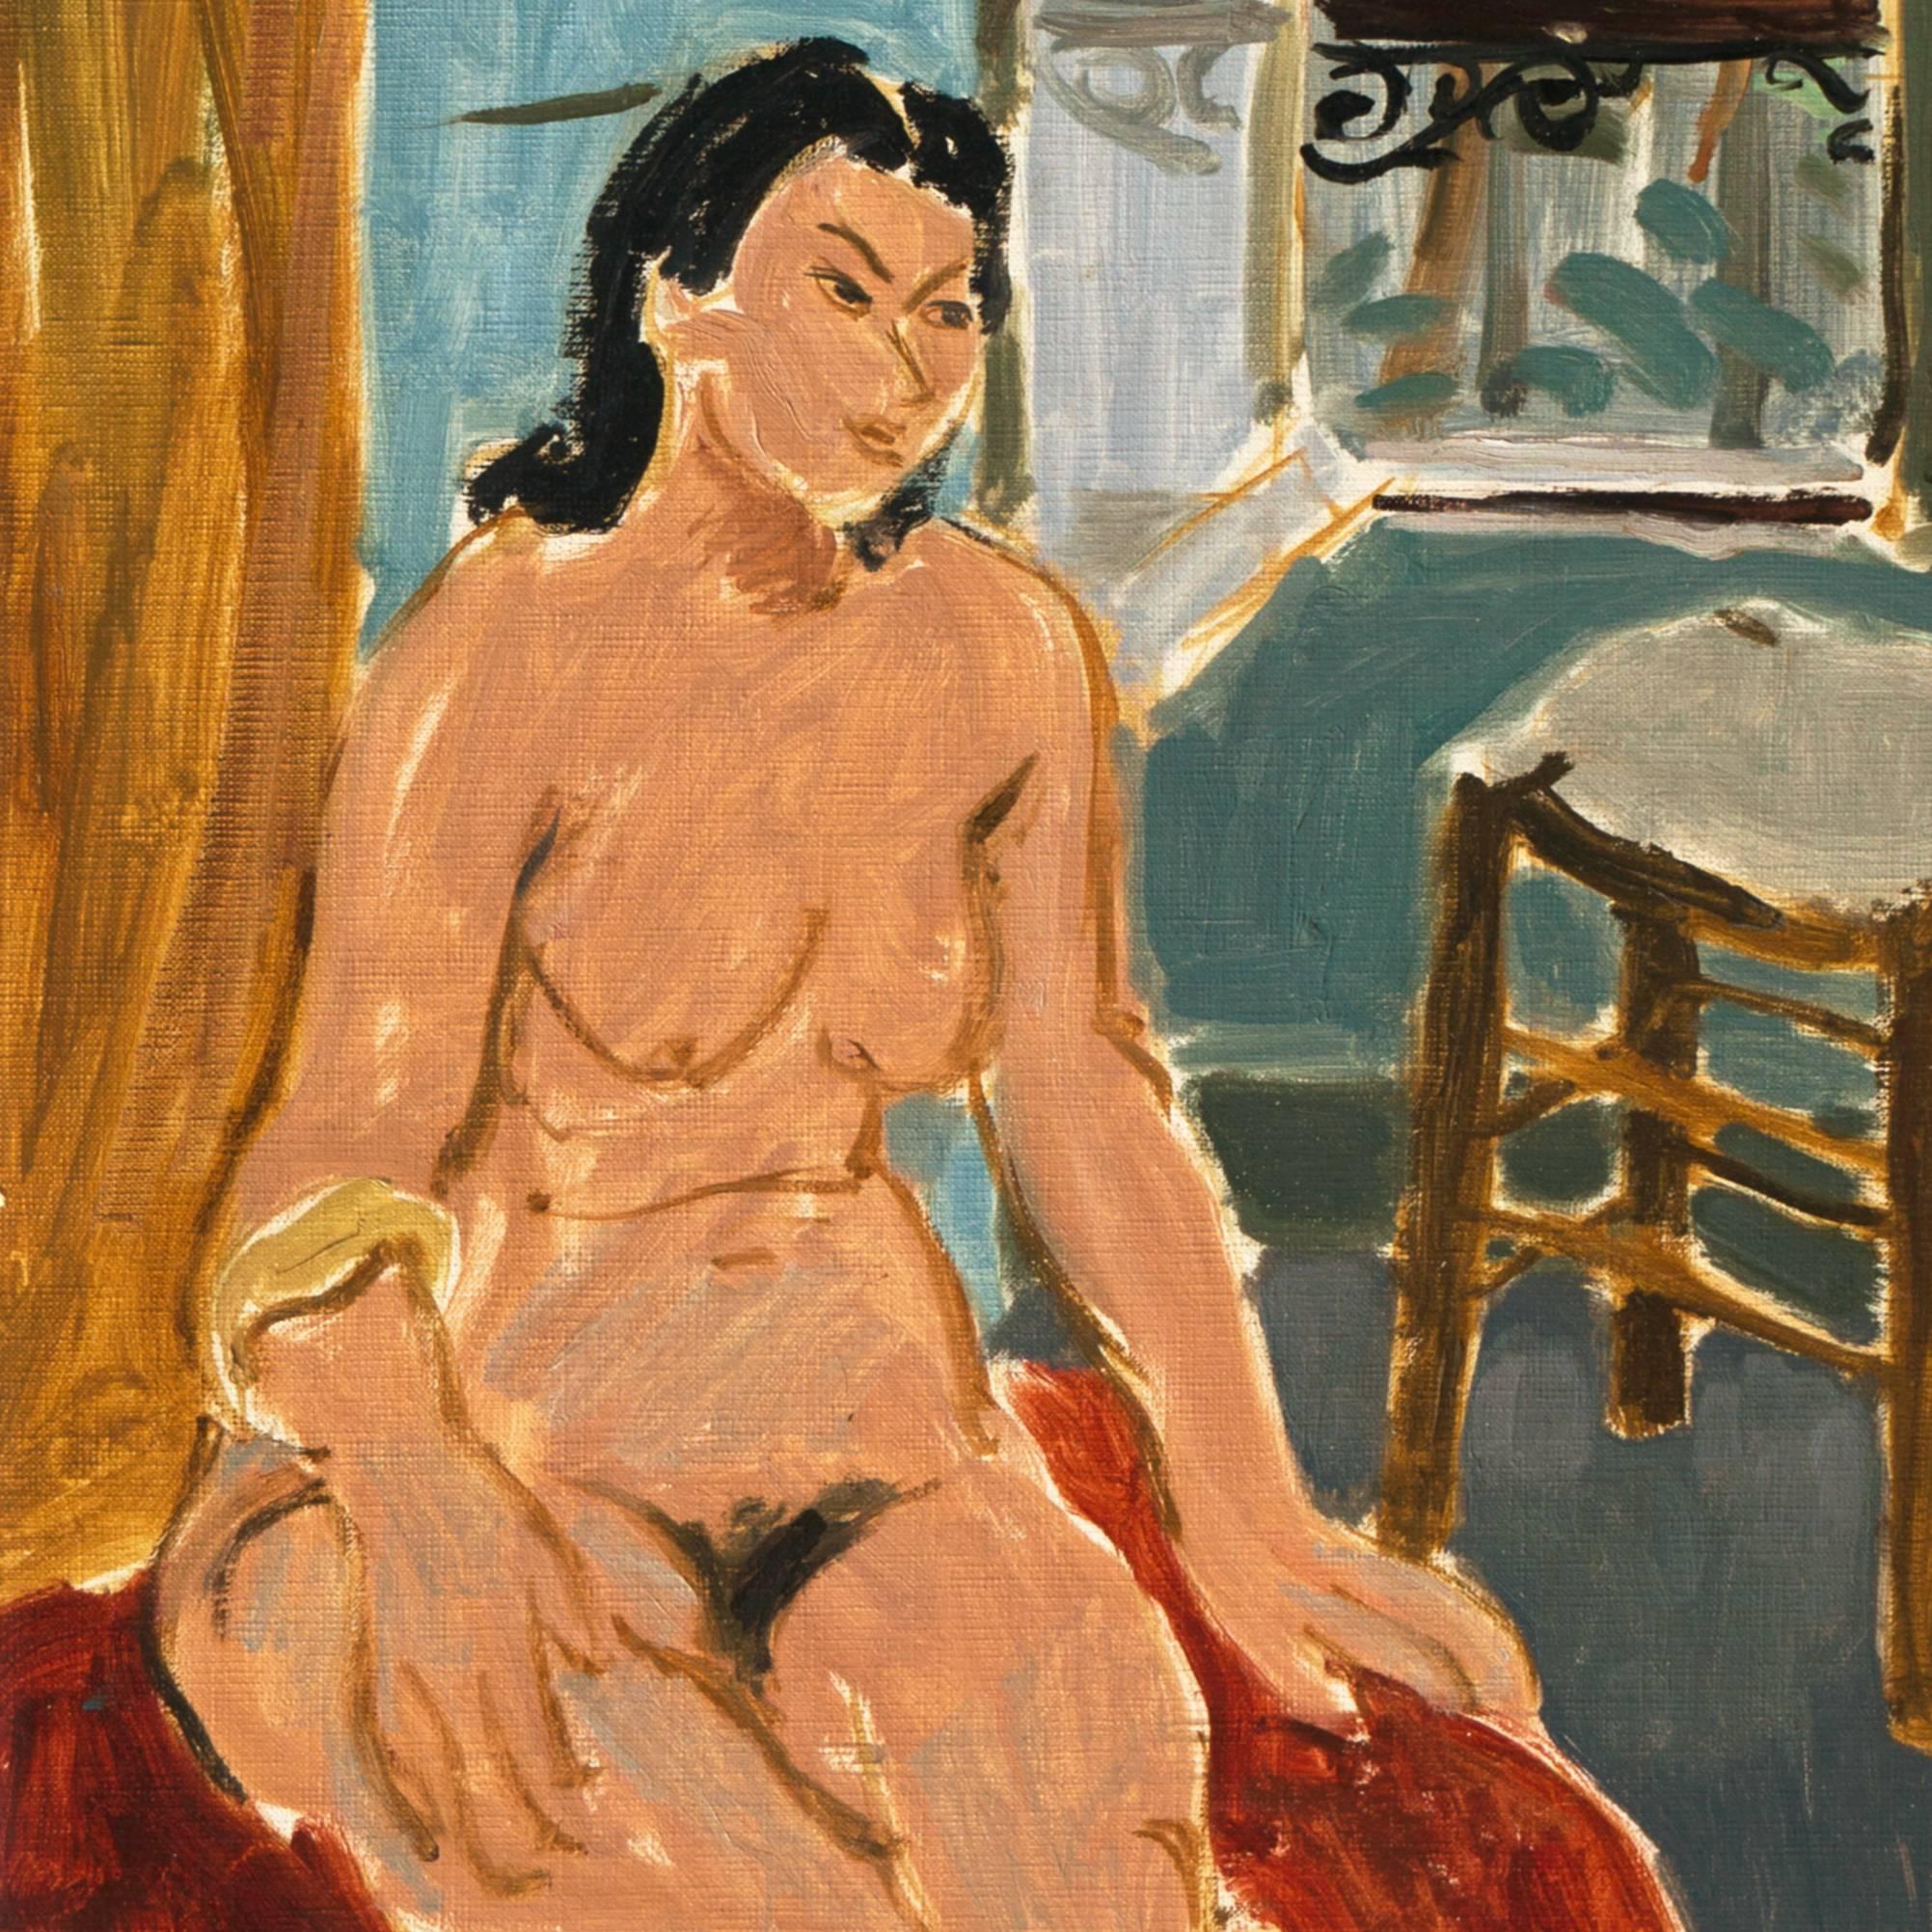 California Post-Impressionist 'Seated Nude', Louvre, Académie Chaumière, LACMA - Brown Interior Painting by Victor Di Gesu